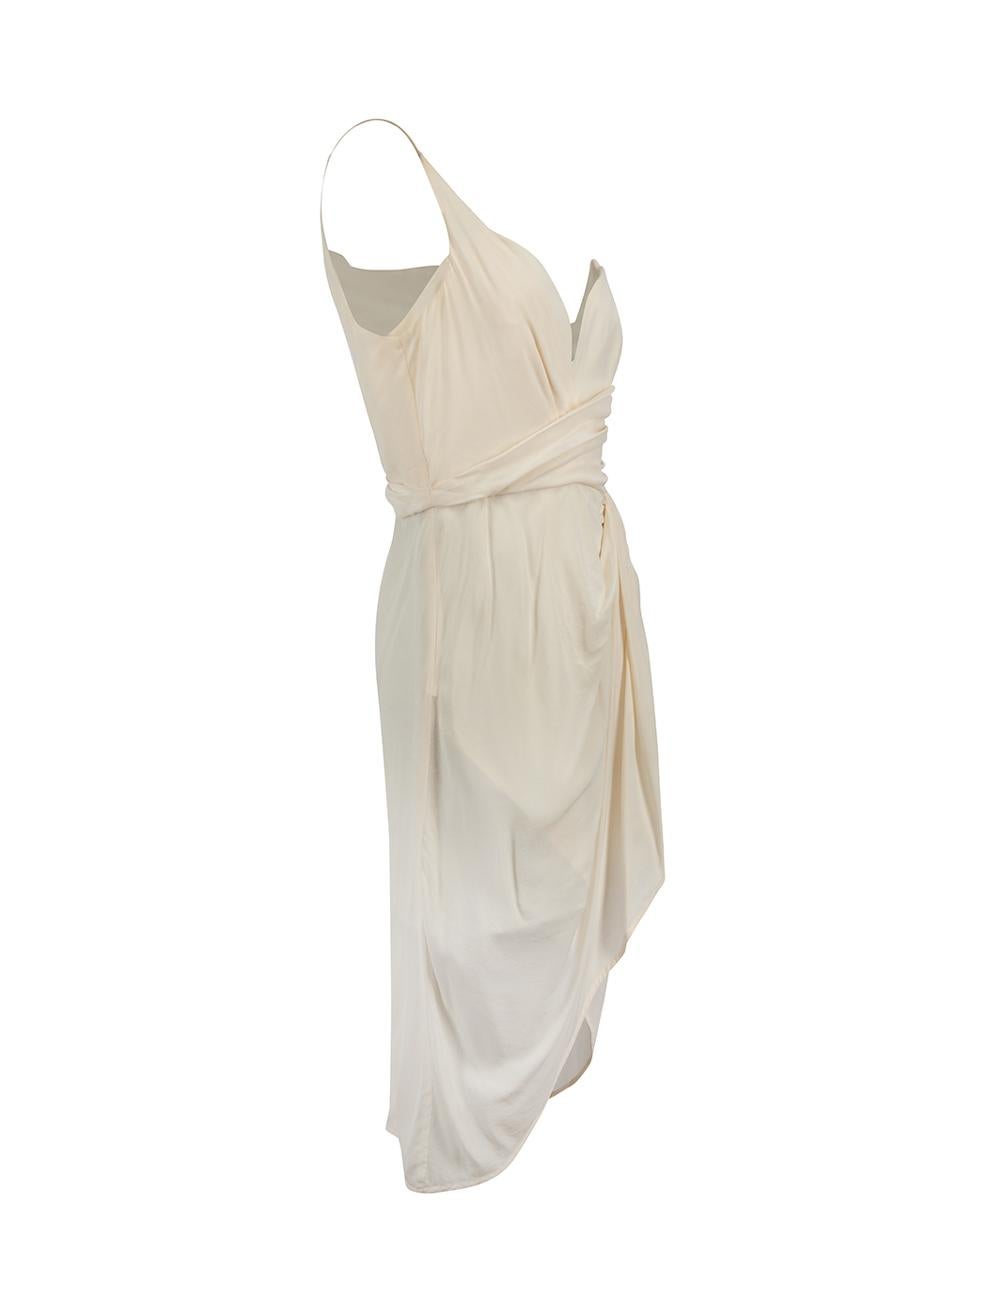 CONDITION is Very good. Minor pulls in fabric on left hand side of dress. Minimal wear to this used Zimmermann designer resale item.



Details


Cream

Silk

Mini dress

Single shoulder strapped

Plunge neckline

Ruched accent

Side zip closure